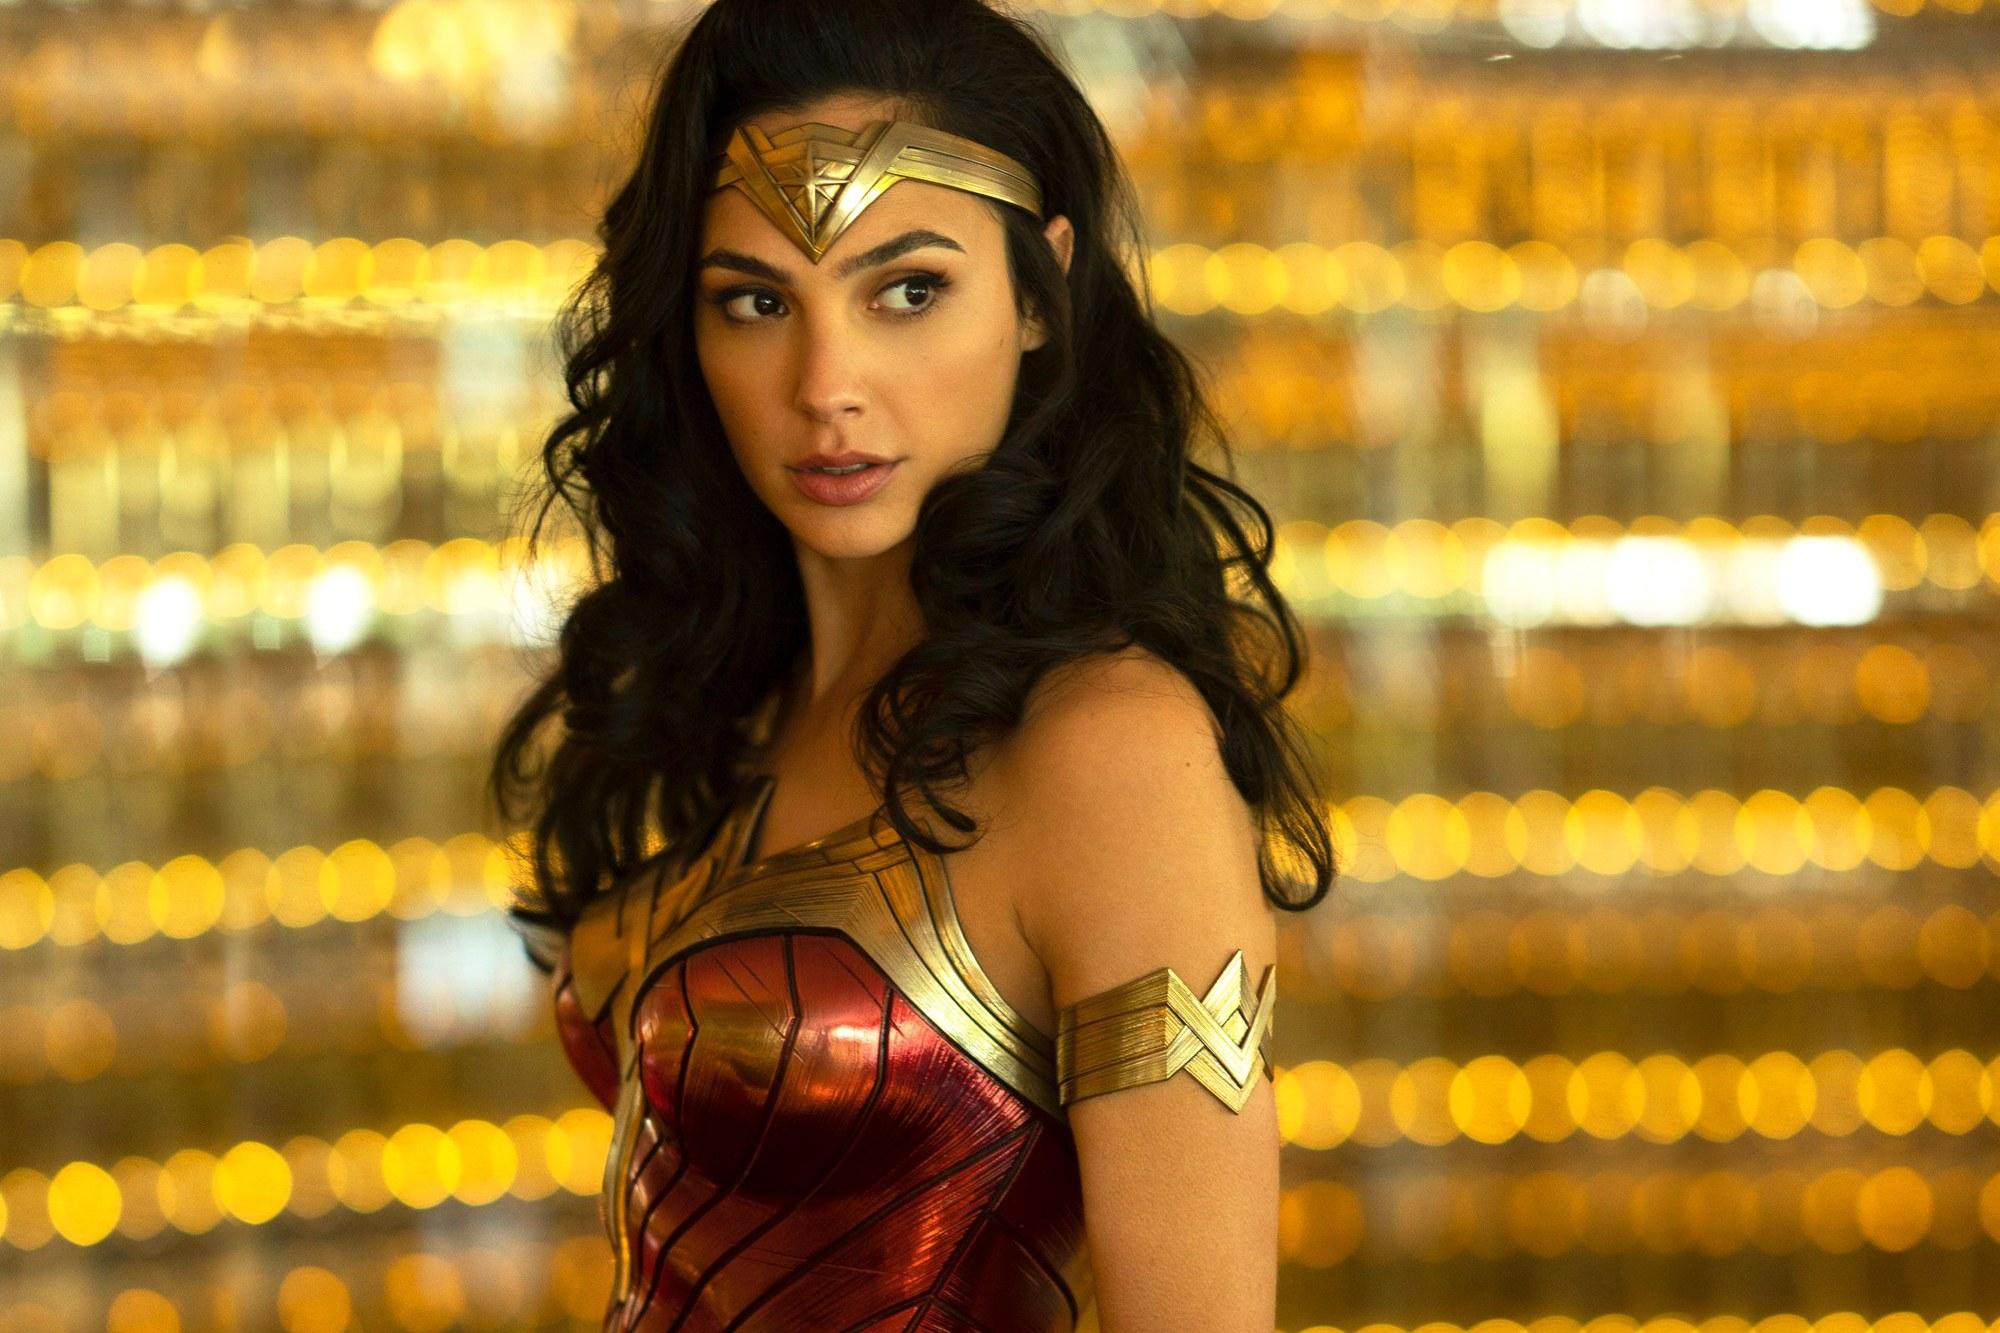 Wonder Woman 1984 Is Not a Sequel, According to Patty